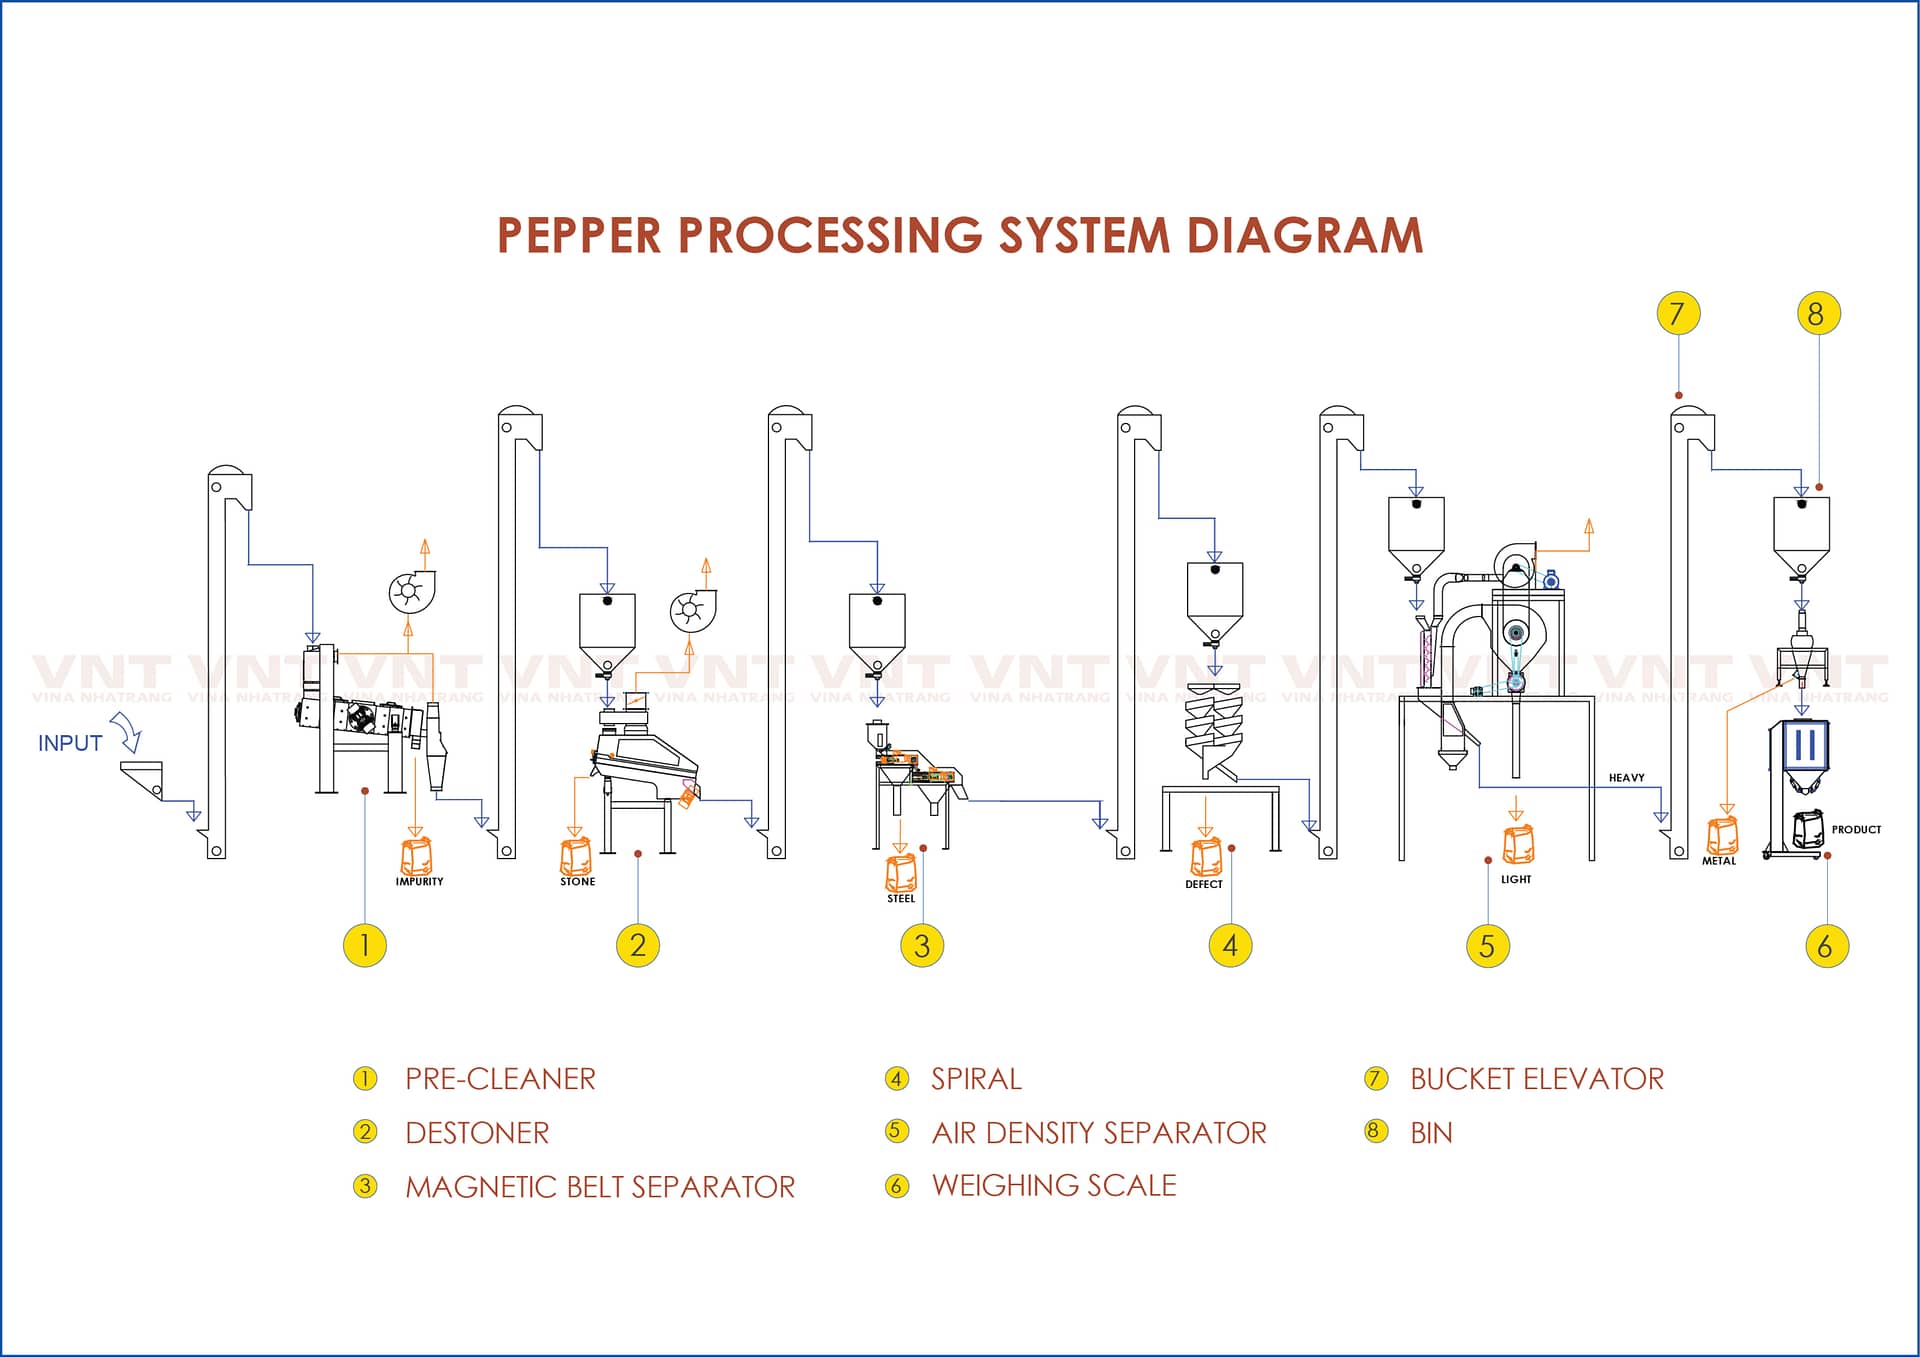 PEPPER PROCESSING SYSTEM